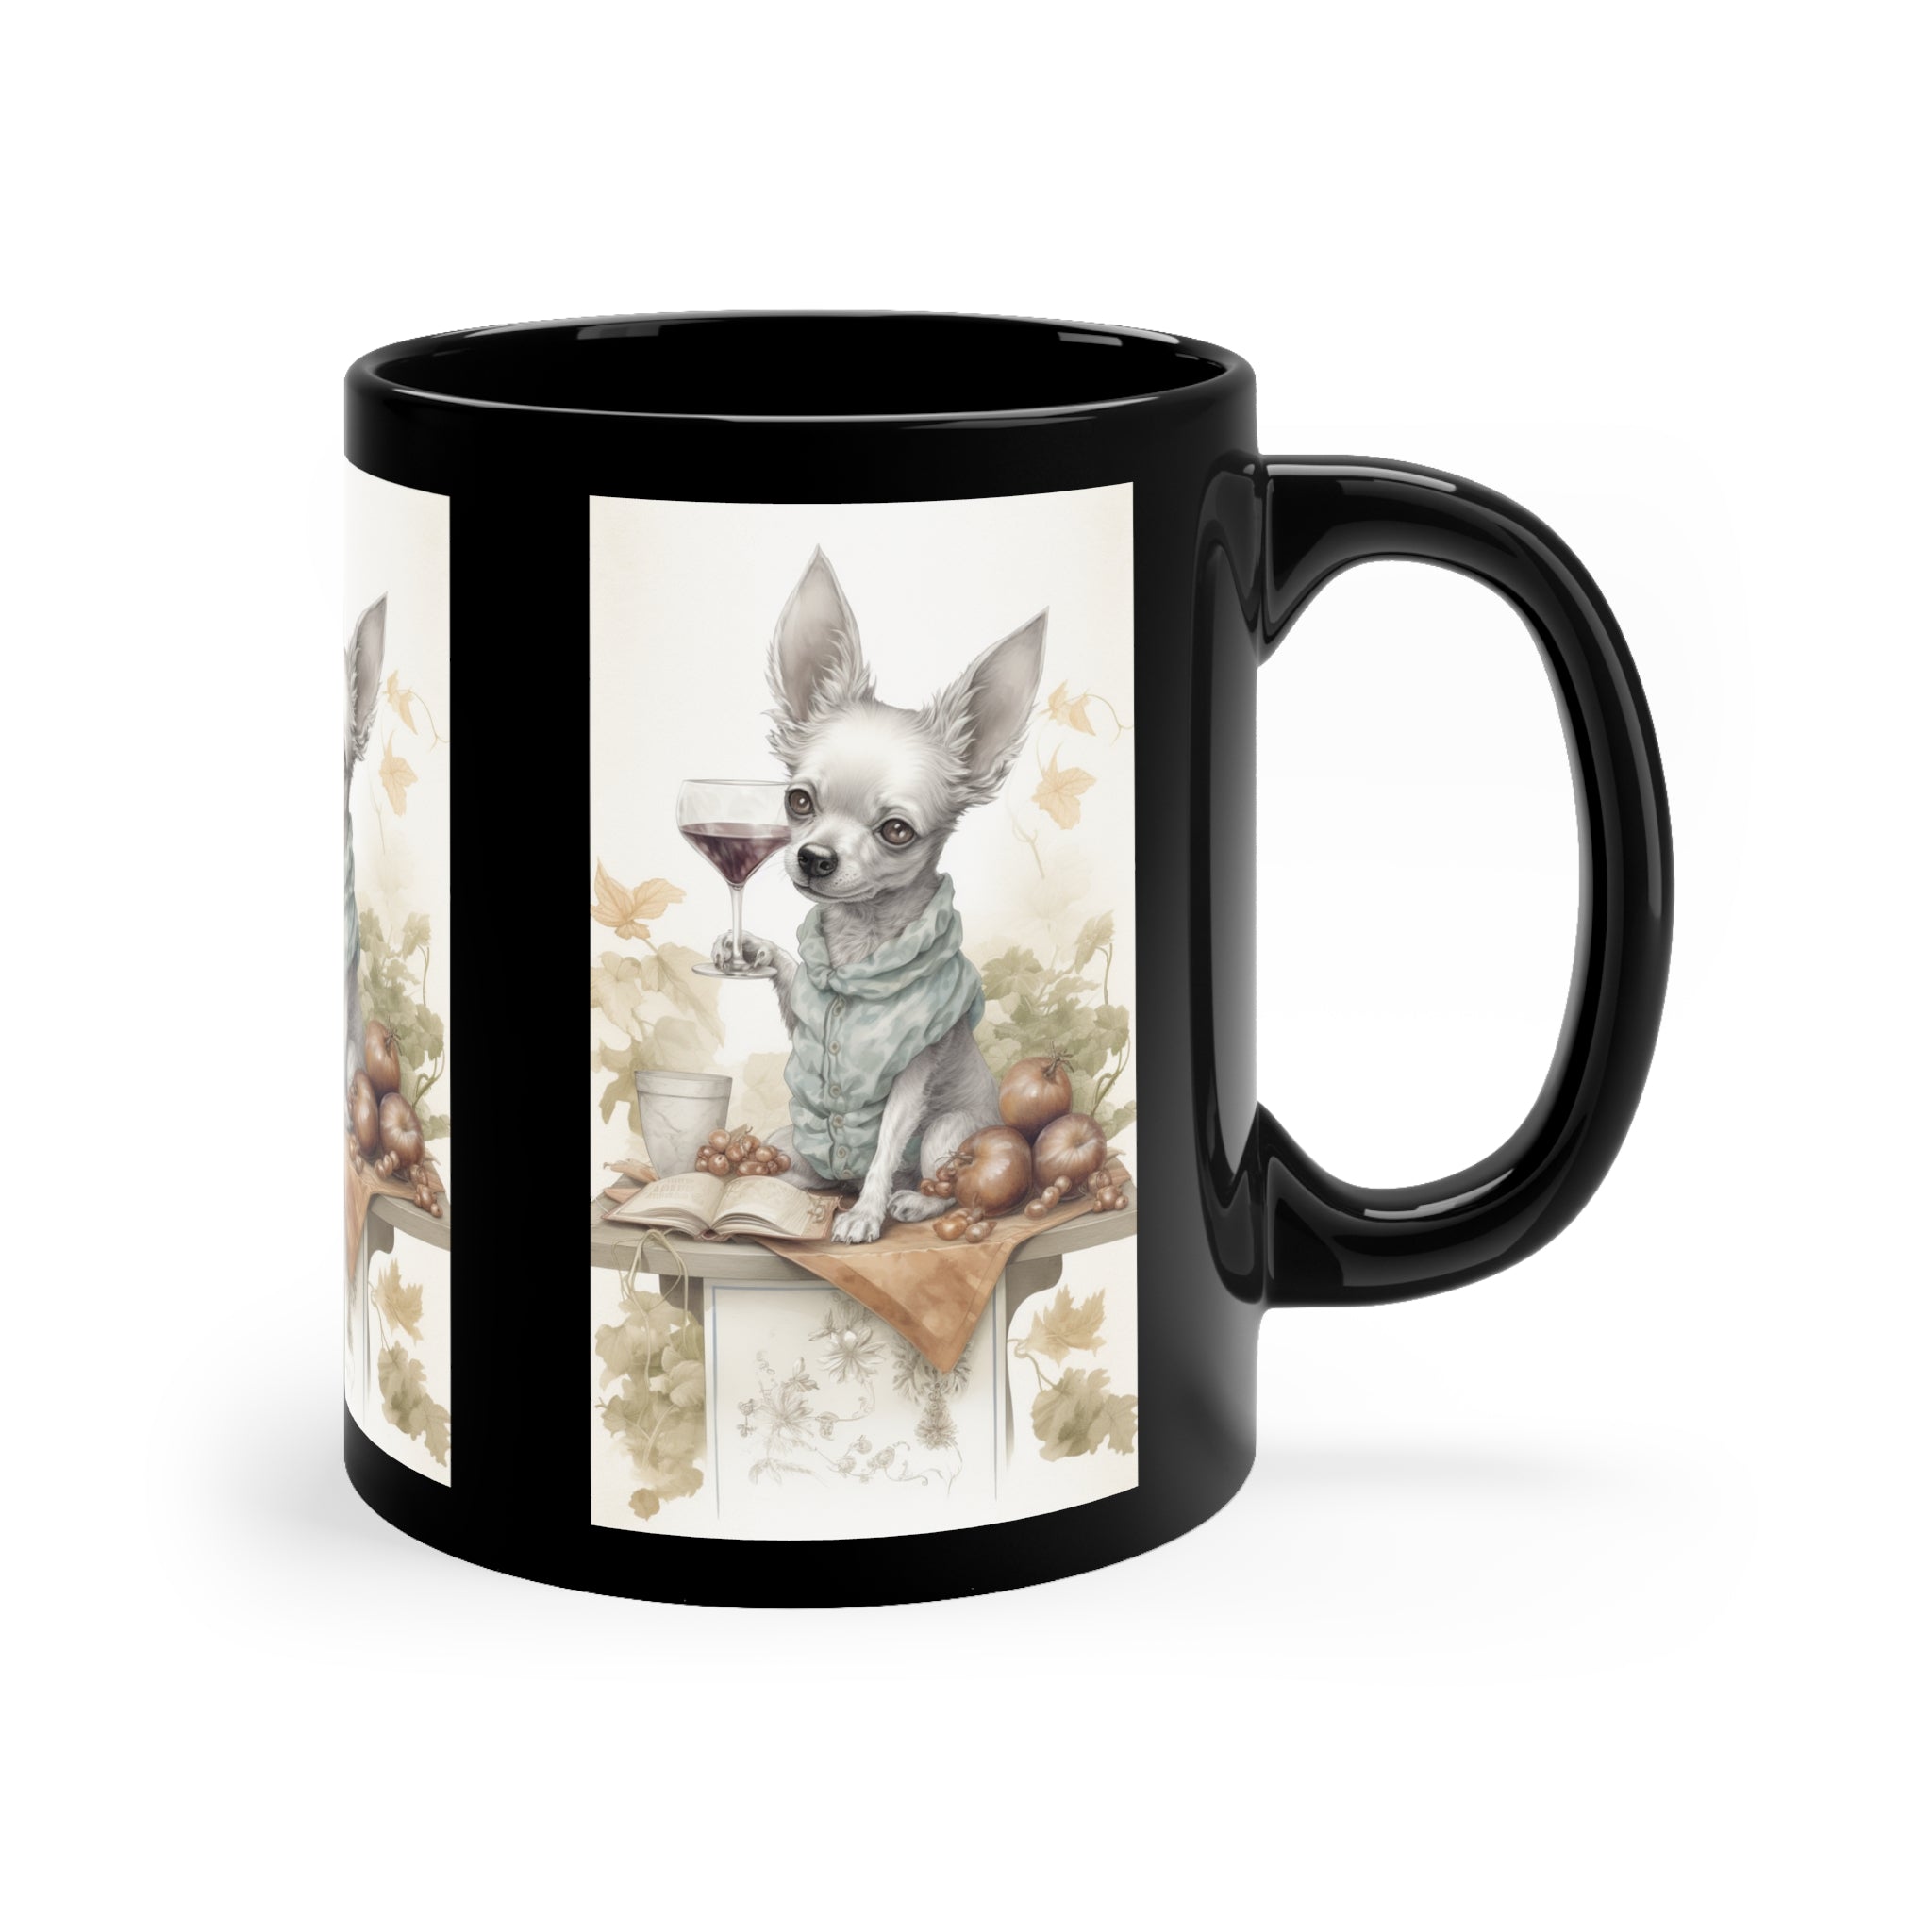 🍷 Wine Serving Chihuahua 11oz Black Mug - Whimsical Dog Lover's Coffee Cup | Adorable Chihuahua Bartender for Wine Enthusiasts